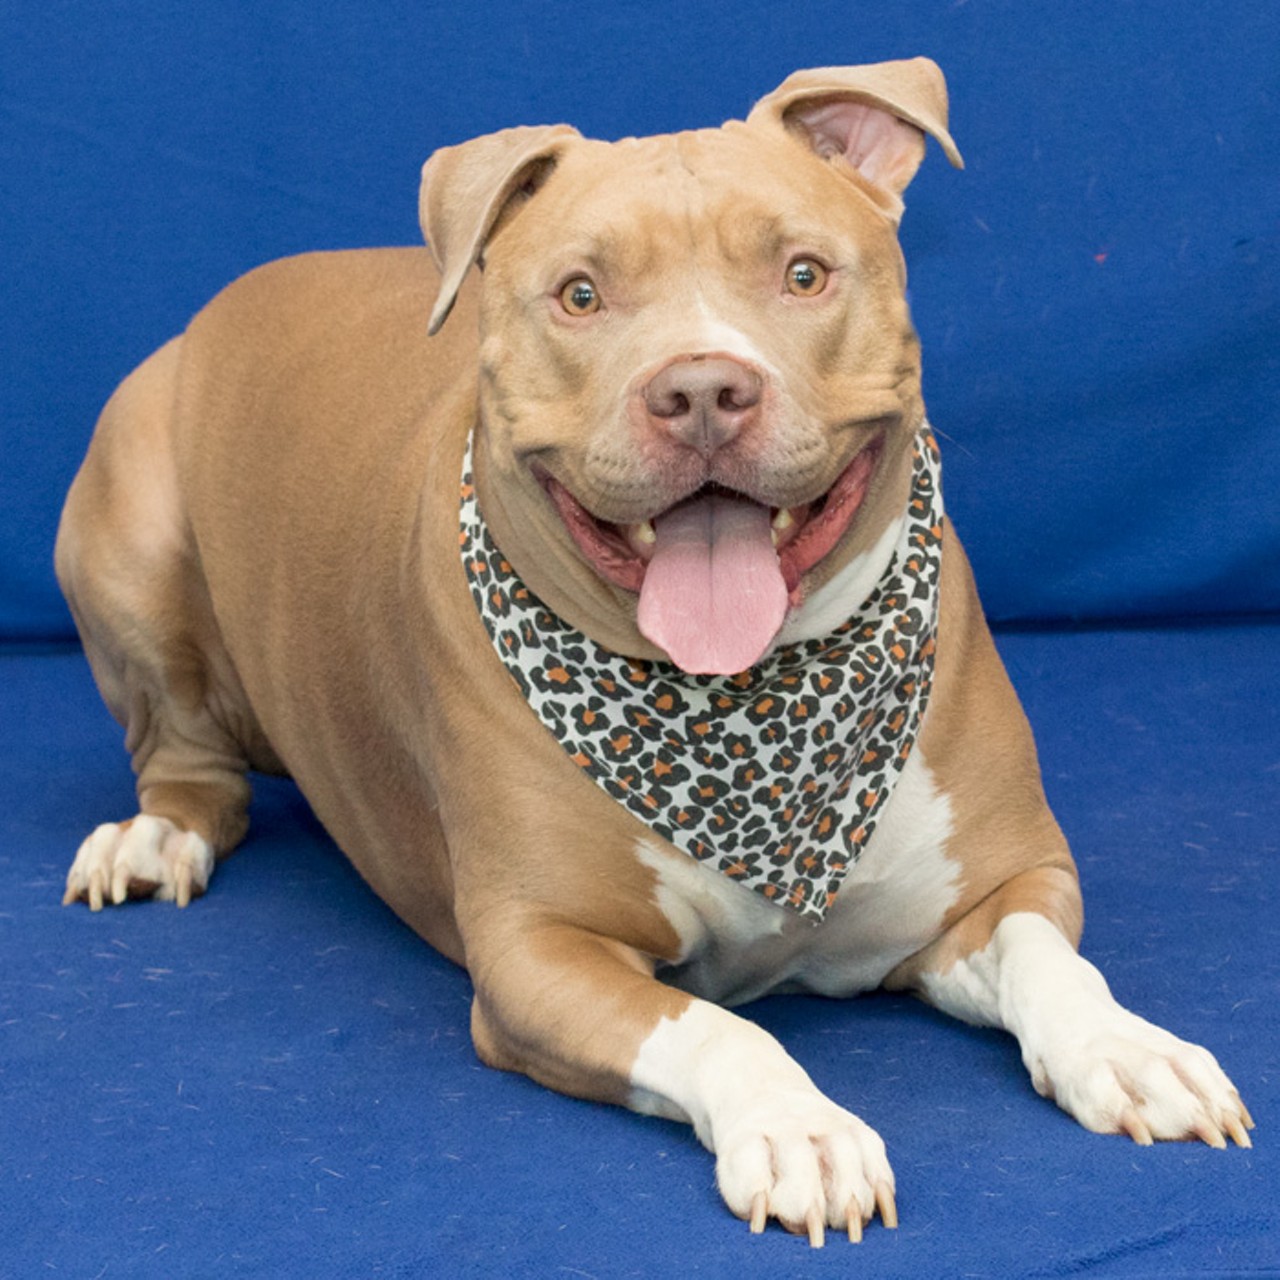 NAME: Gage
GENDER: Male
BREED: Pit Bull Terrier
AGE: 5 years
WEIGHT: 87 pounds
SPECIAL CONSIDERATIONS: None
REASON I CAME TO MHS: Owner surrender
LOCATION: Berman Center for Animal Care in Westland
ID NUMBER: 865068